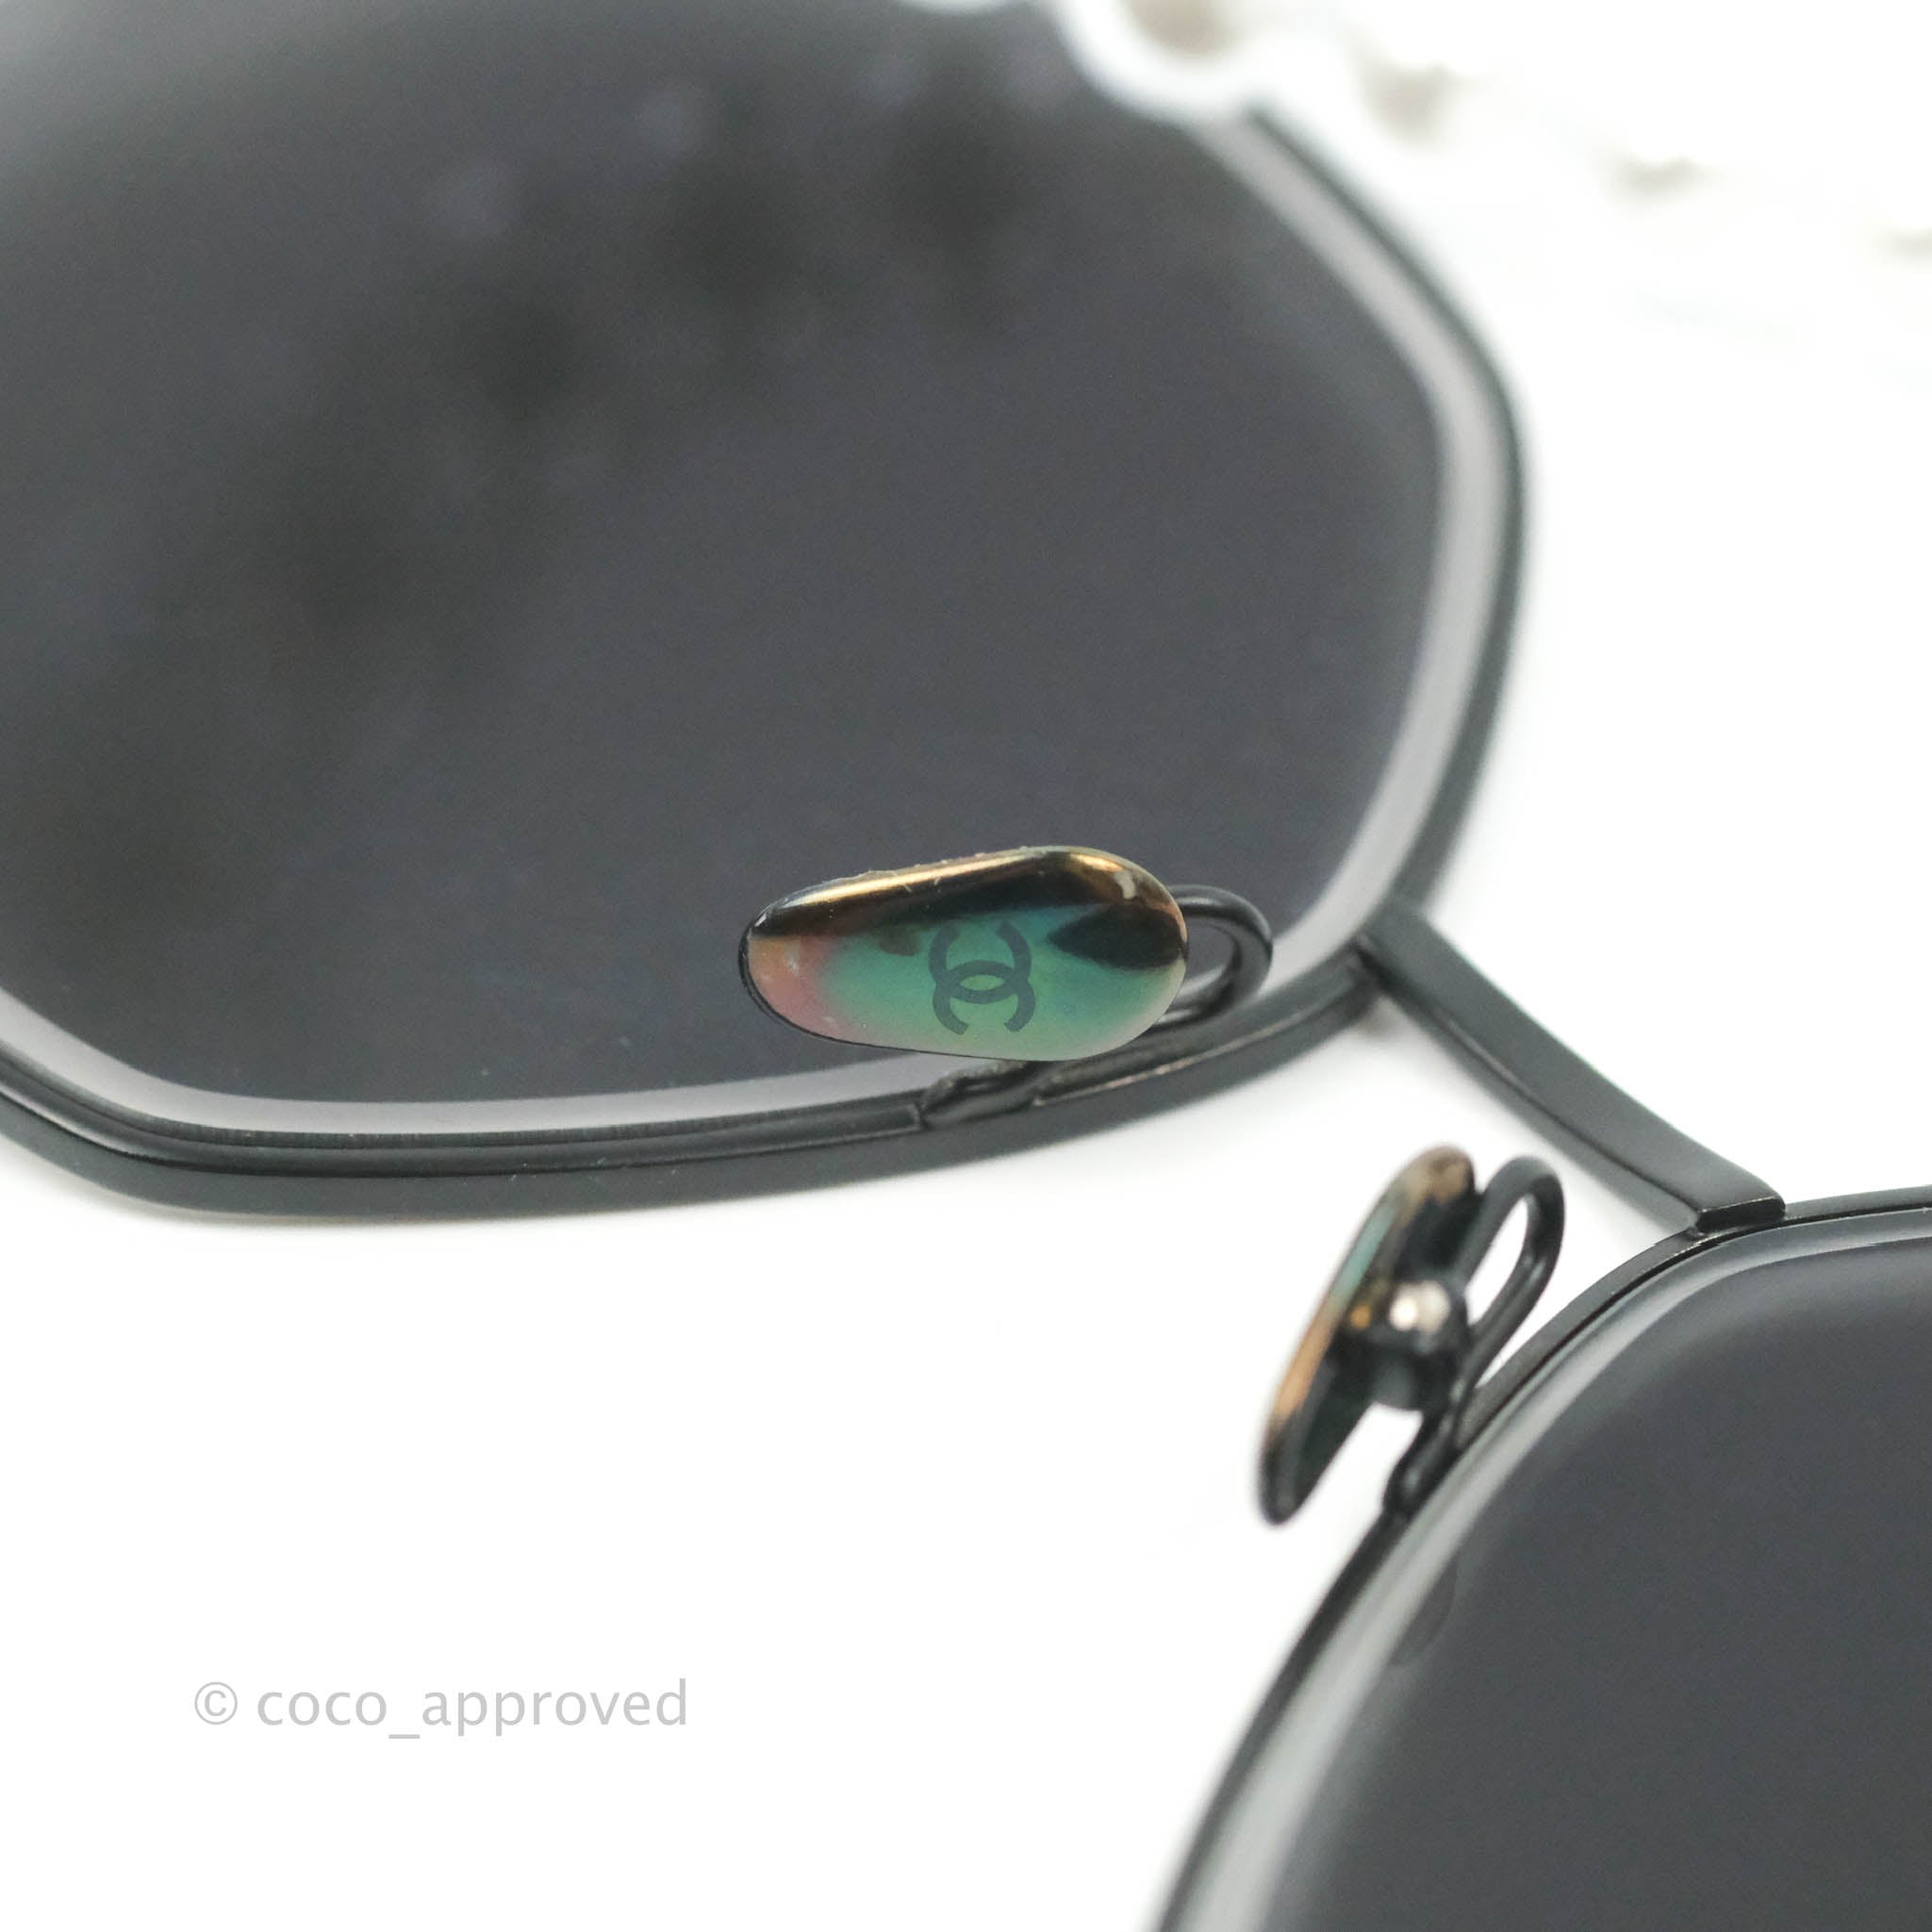 Chanel 4262 Butterfly Black Metal Sunglasses with Pearl Strap